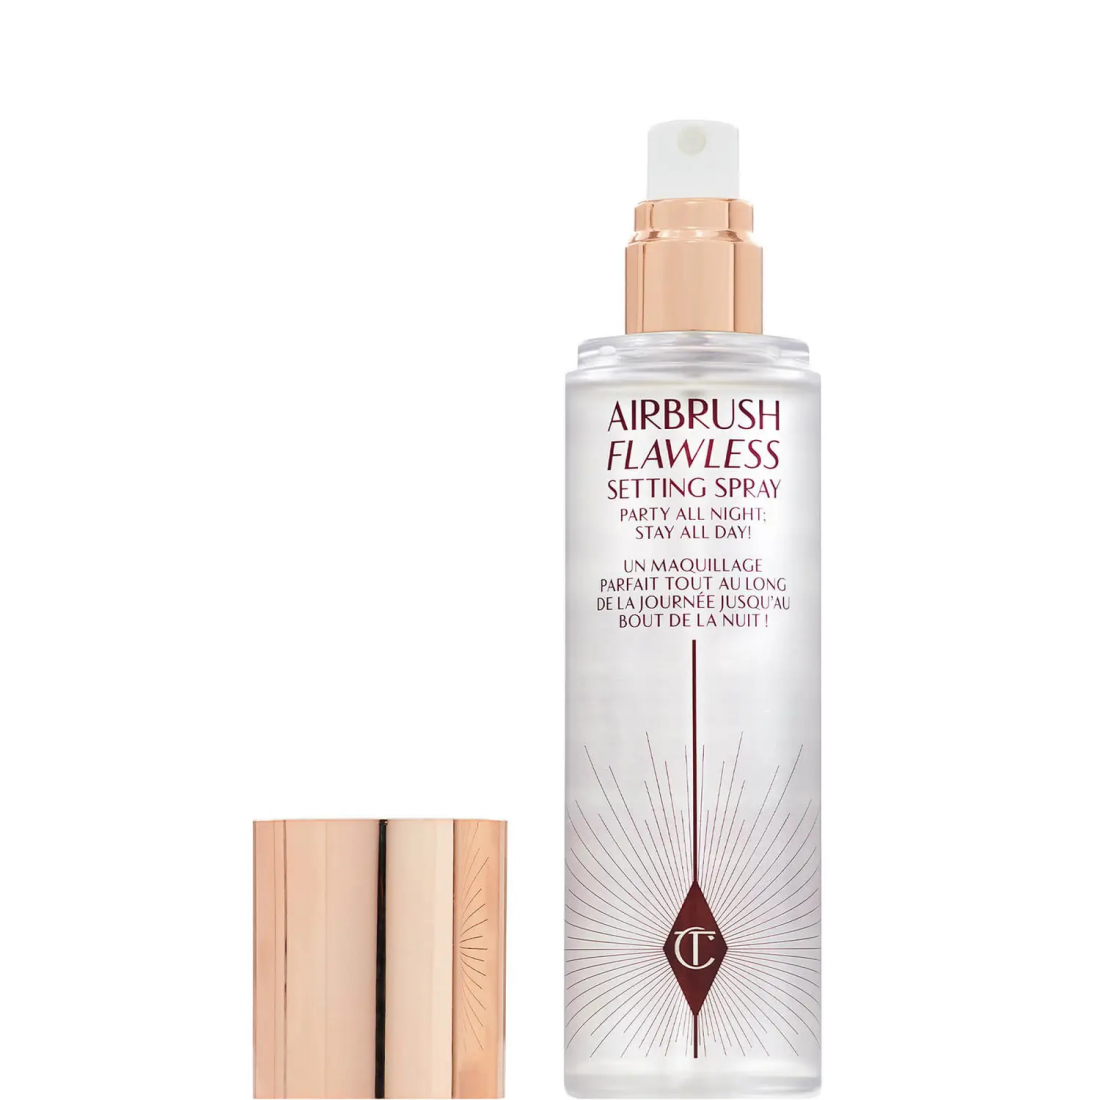 'Airbrush Flawless Stay All Day Setting' Spray - 100 ml